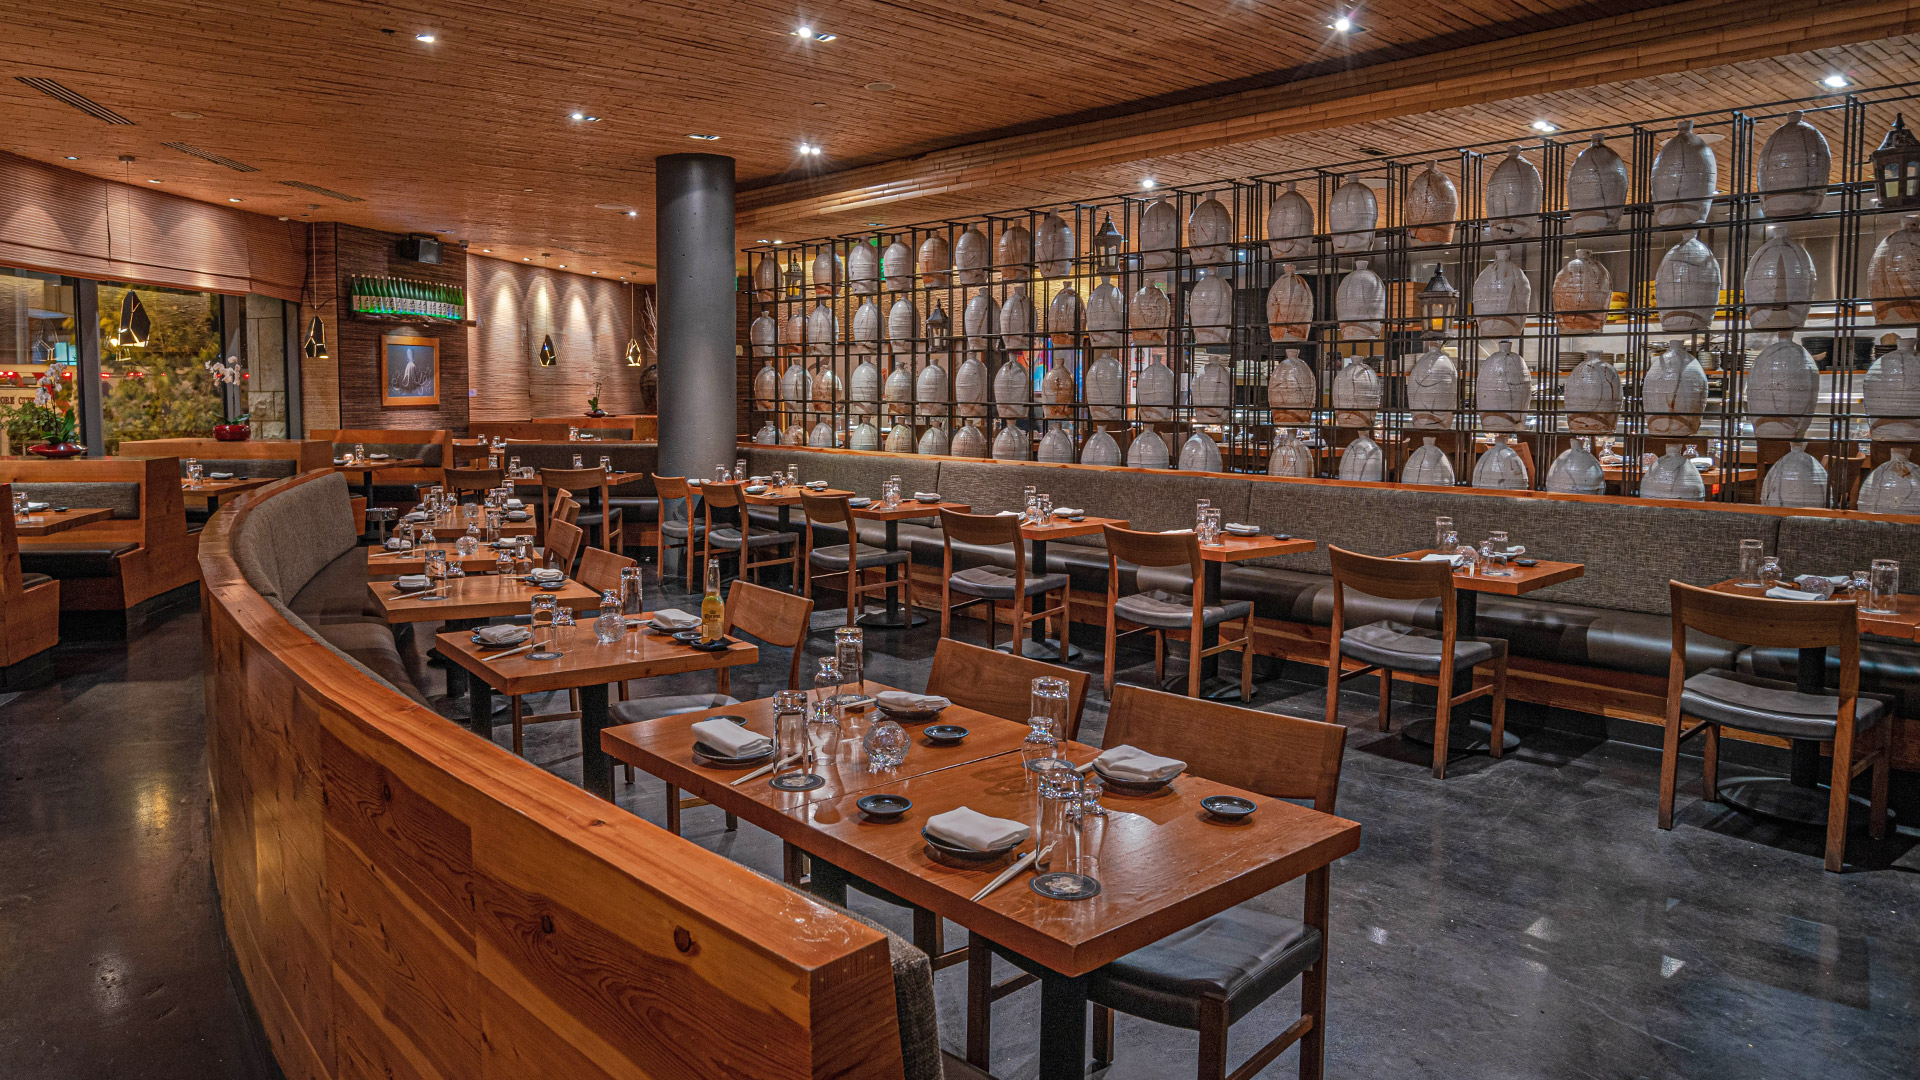 A modern restaurant interior with wooden tables and chairs, set with glasses and plates. A wall of decorative jars and soft lighting create a cozy atmosphere. No people are present.